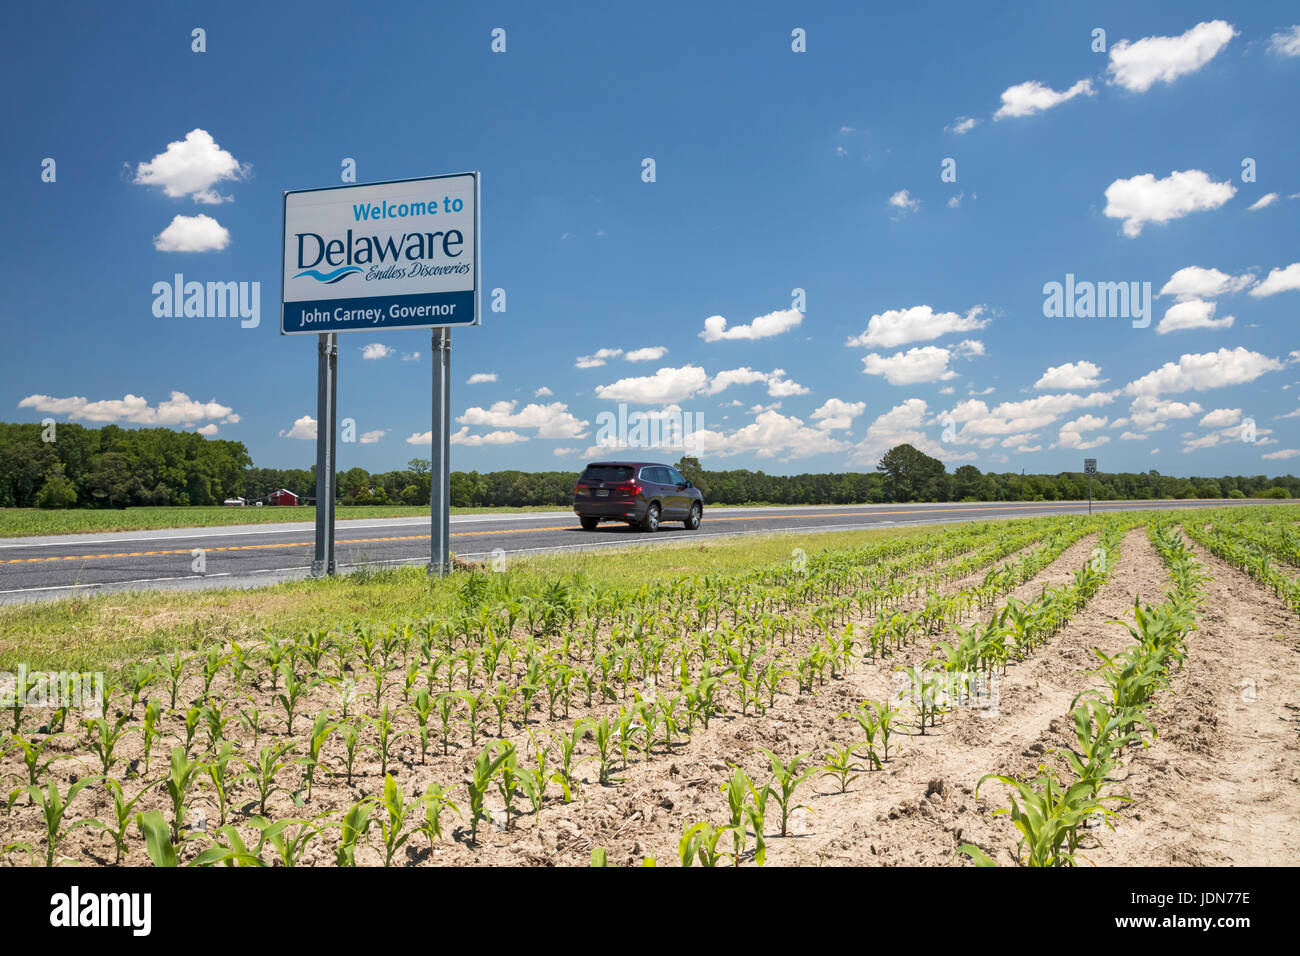 Atlanta, Delaware - A Welcome to Delaware sign beside a corn field in the southwestern part of the state. Stock Photo